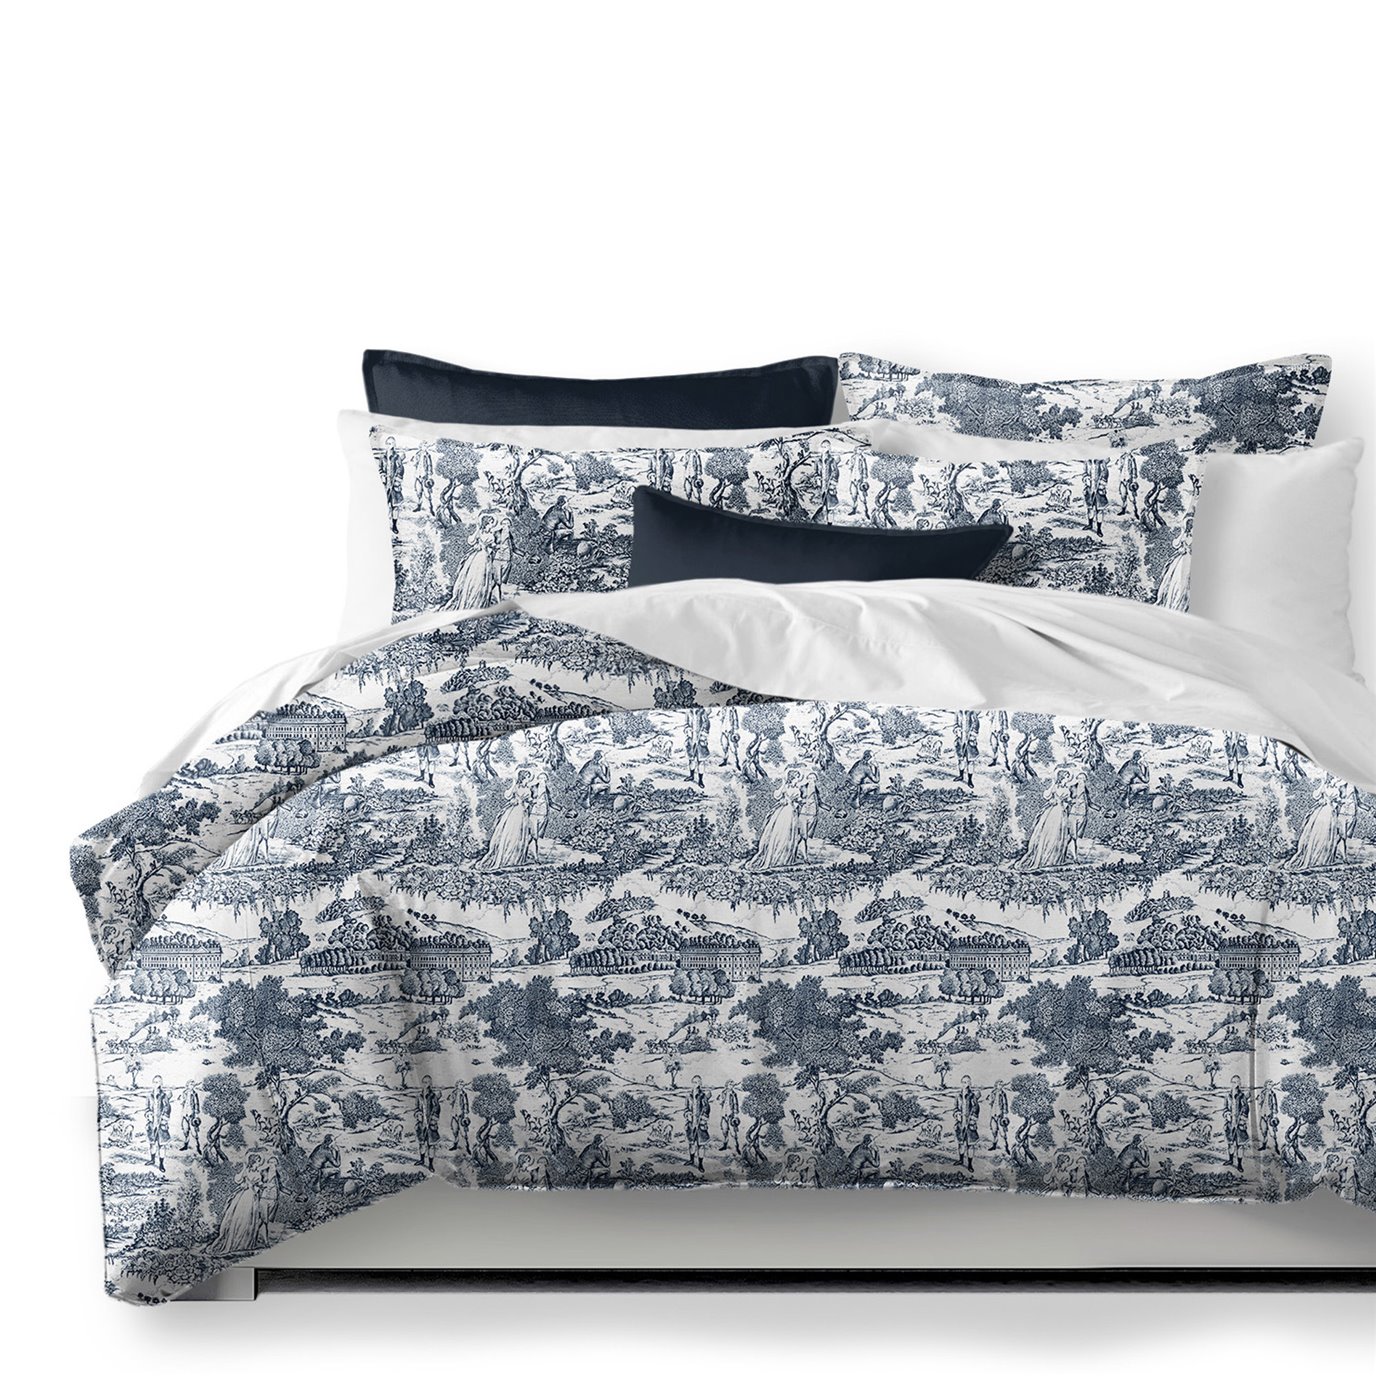 Beau Toile Blue Comforter and Pillow Sham(s) Set - Size King / California King